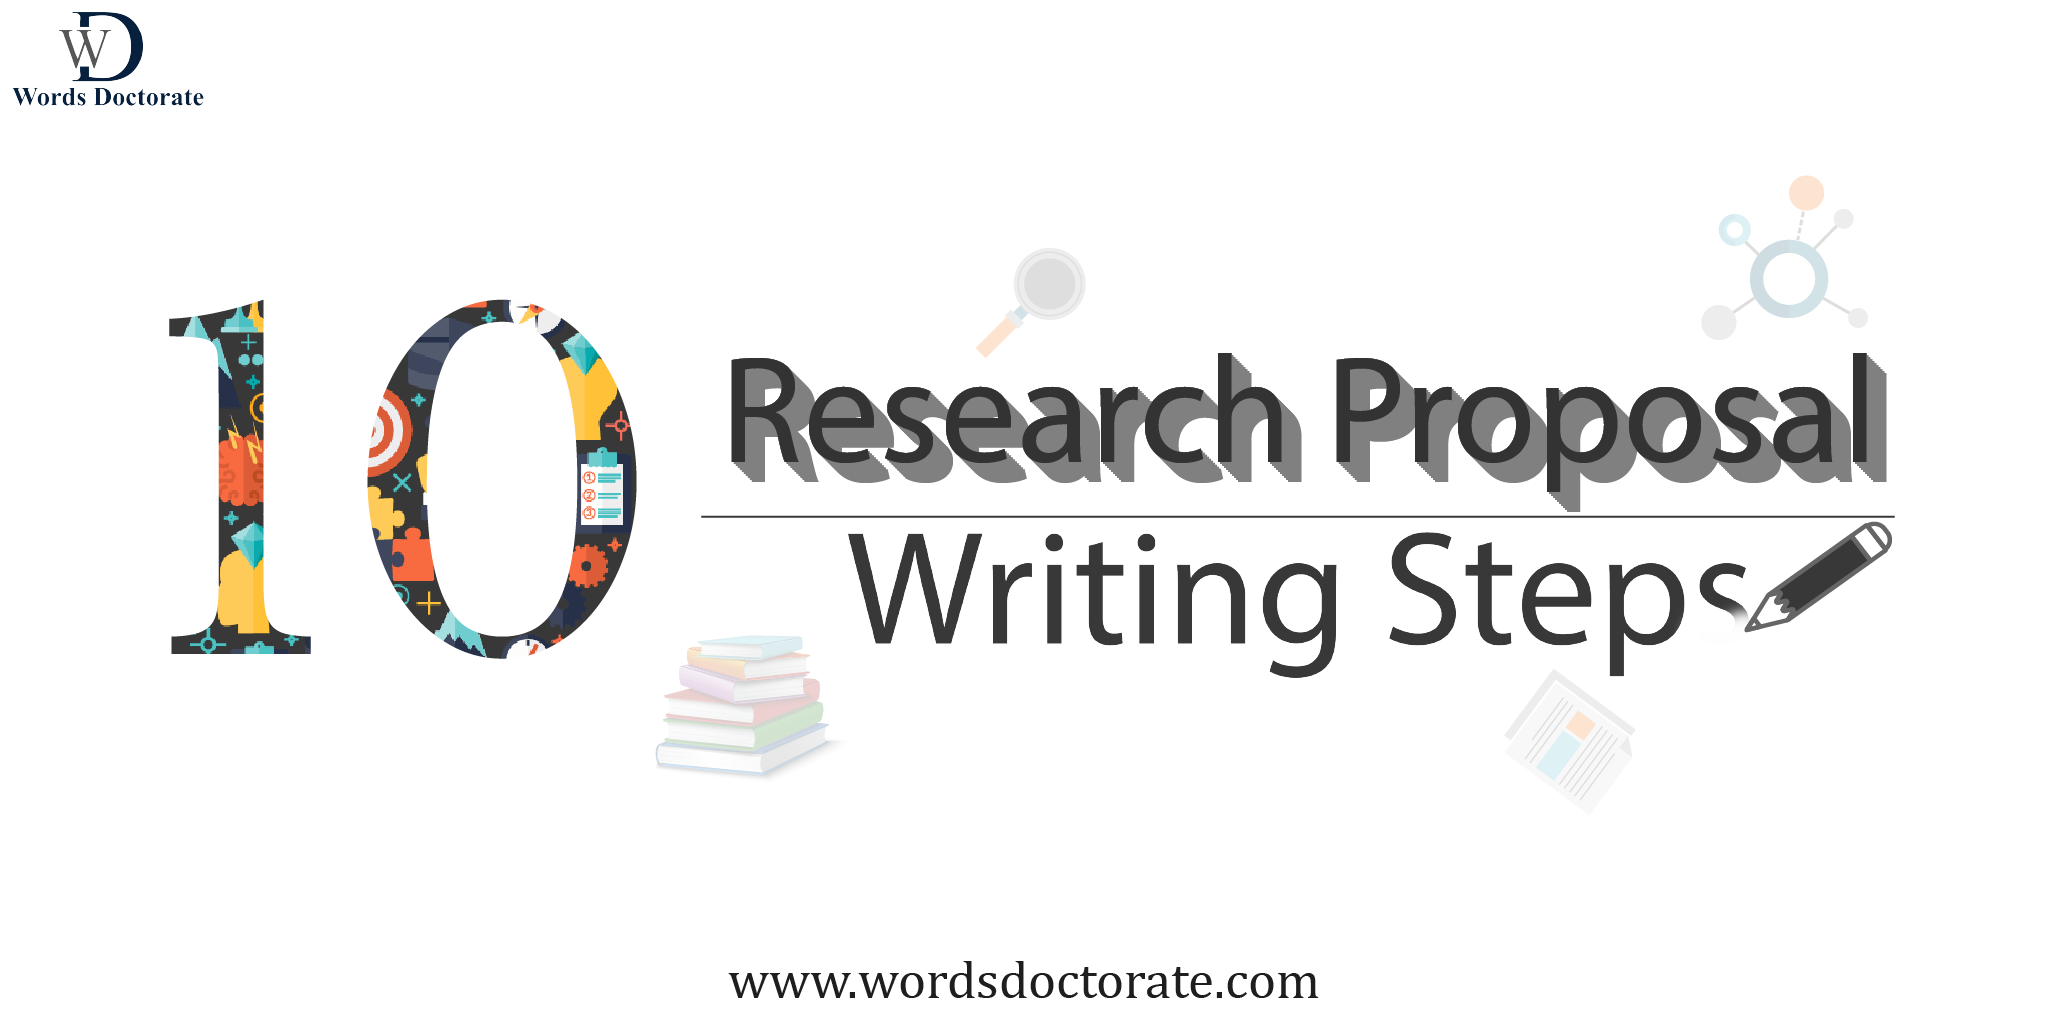 10 Research Proposal Writing Steps